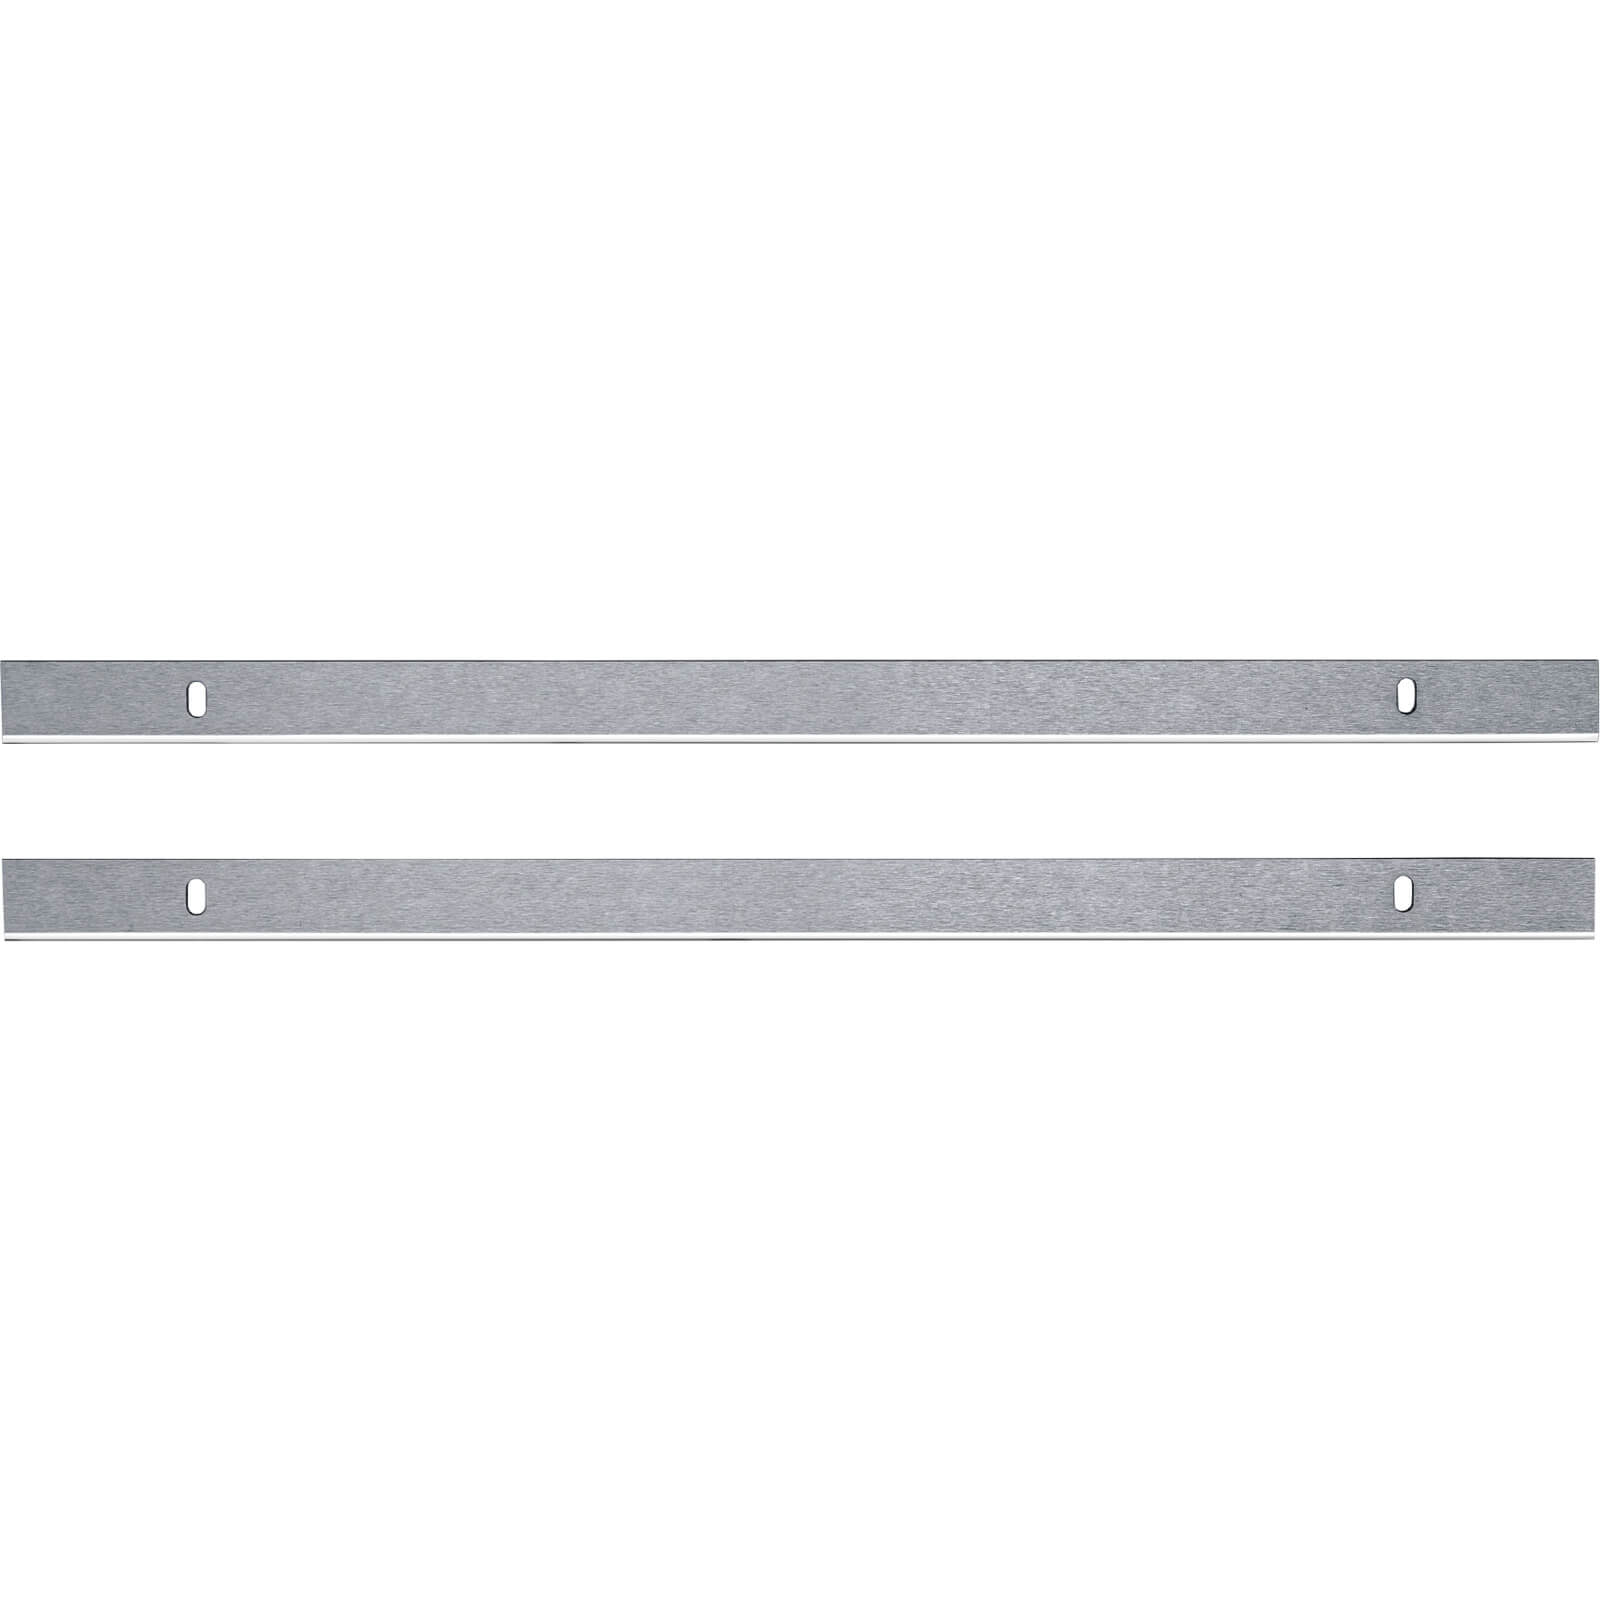 Image of Einhell Stationary Planer Blades 210mm Pack of 2